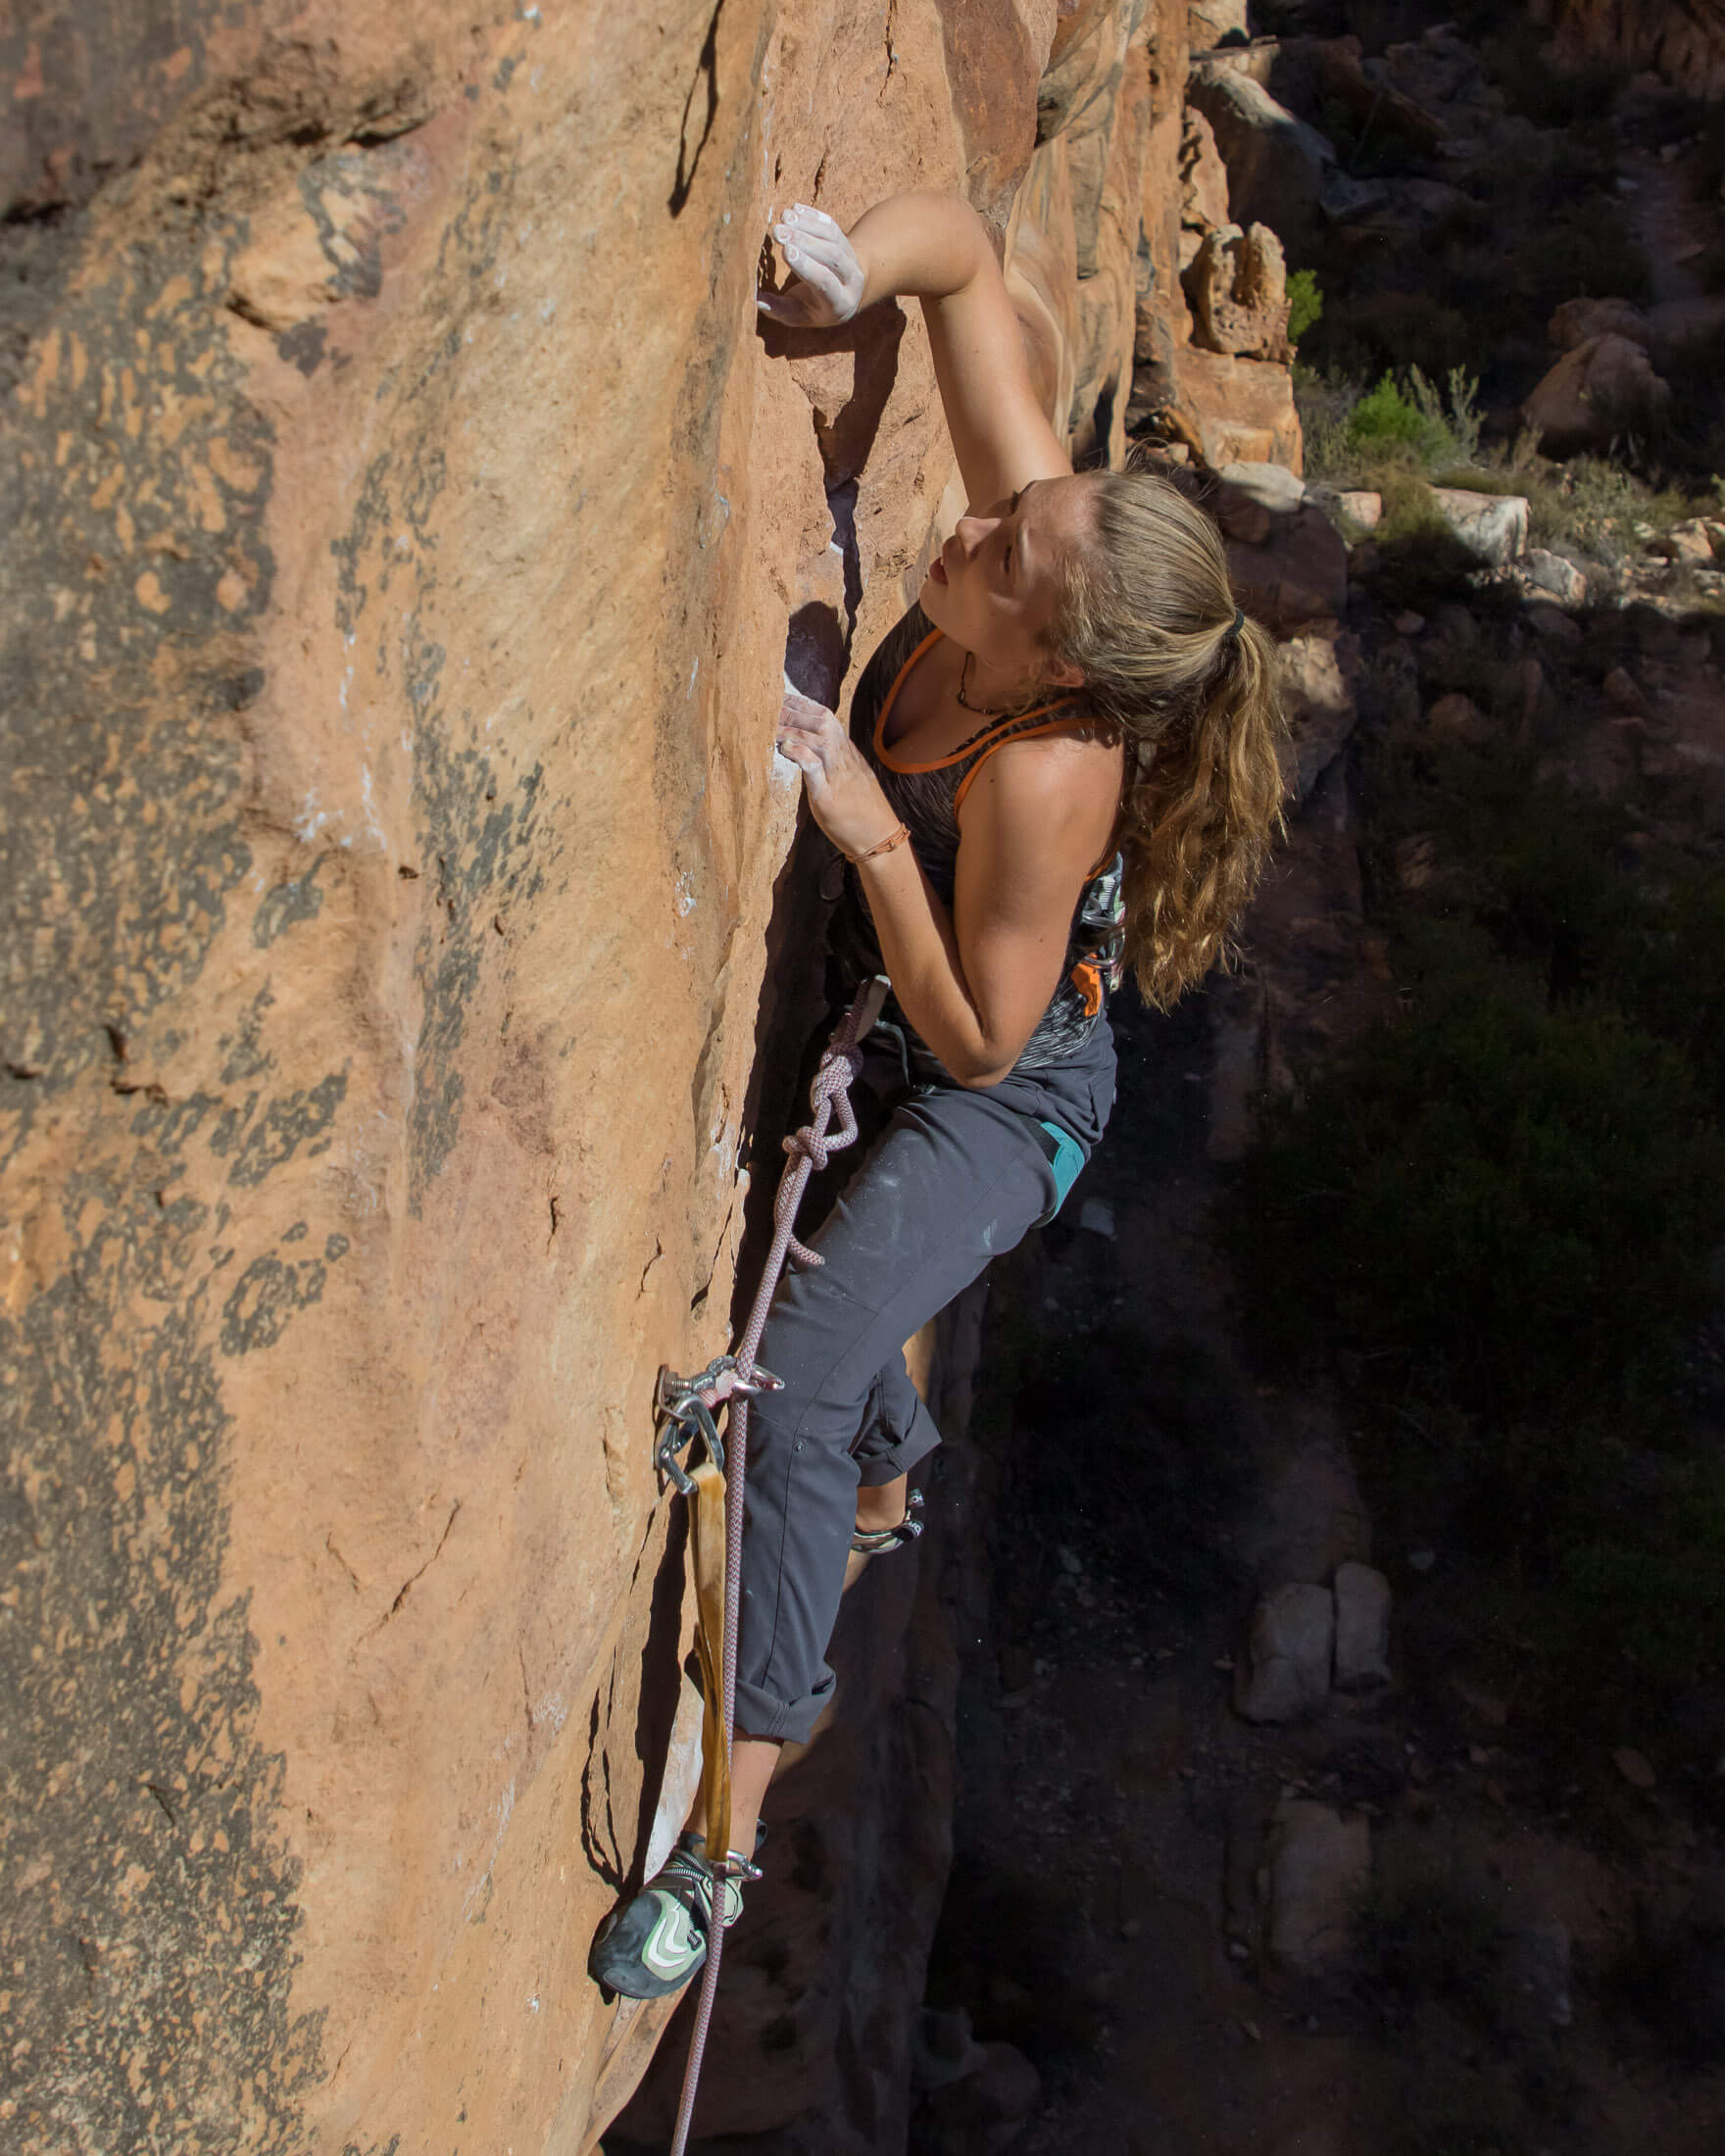 sport climber working the crux sequence on a route